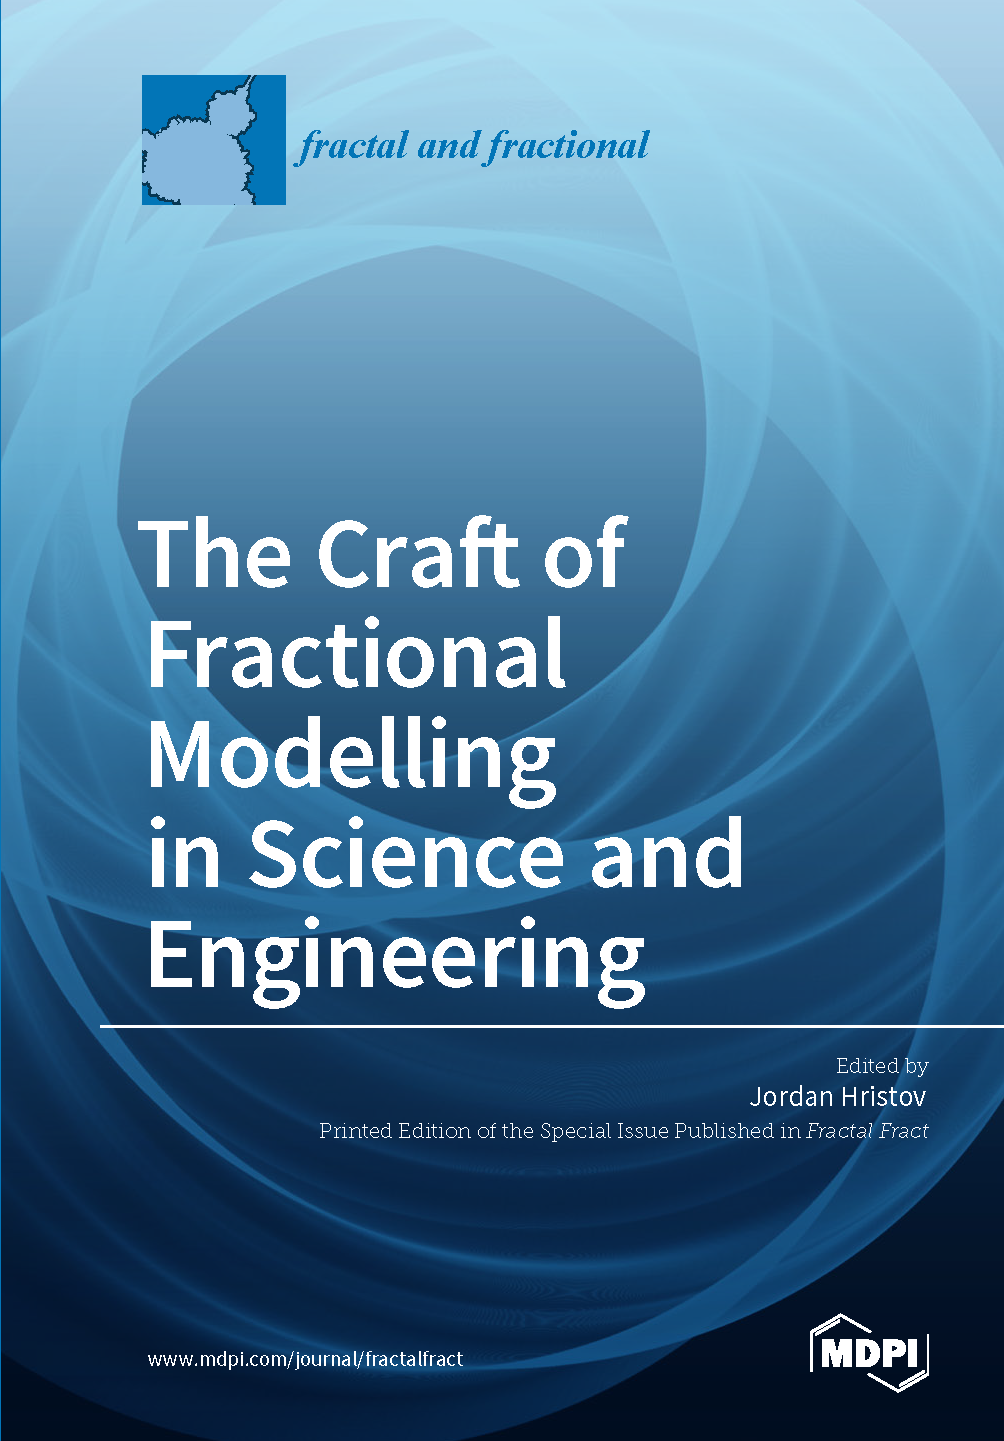 The Craft of Fractional Modelling in Science and Engineering